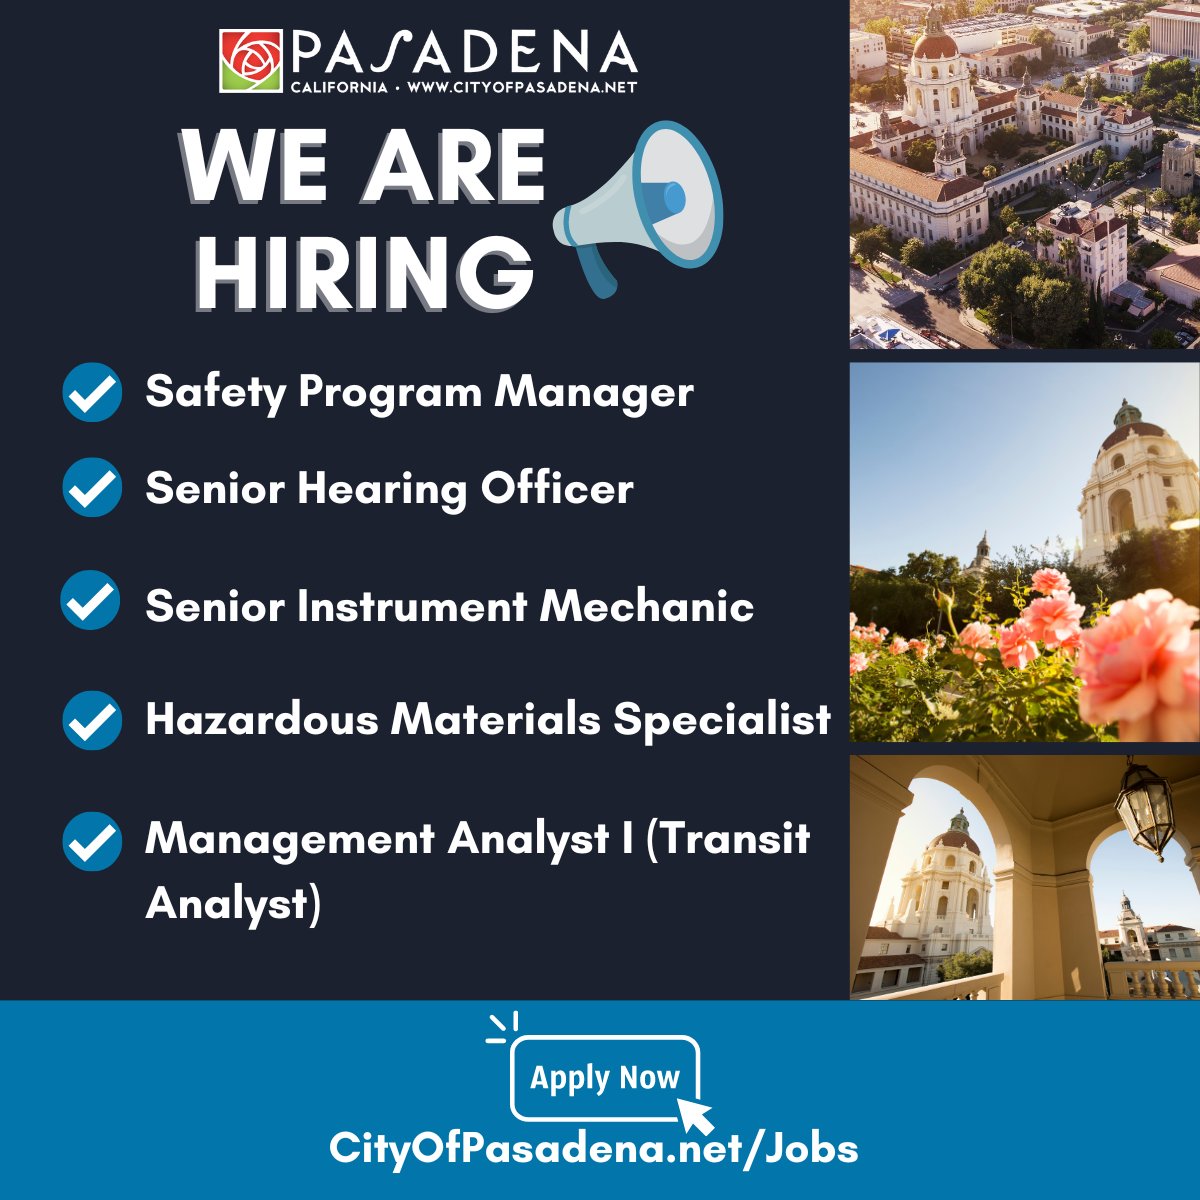 The City of Pasadena is hiring for various positions! Join our team and apply today at CityOfPasadena.net/Jobs.